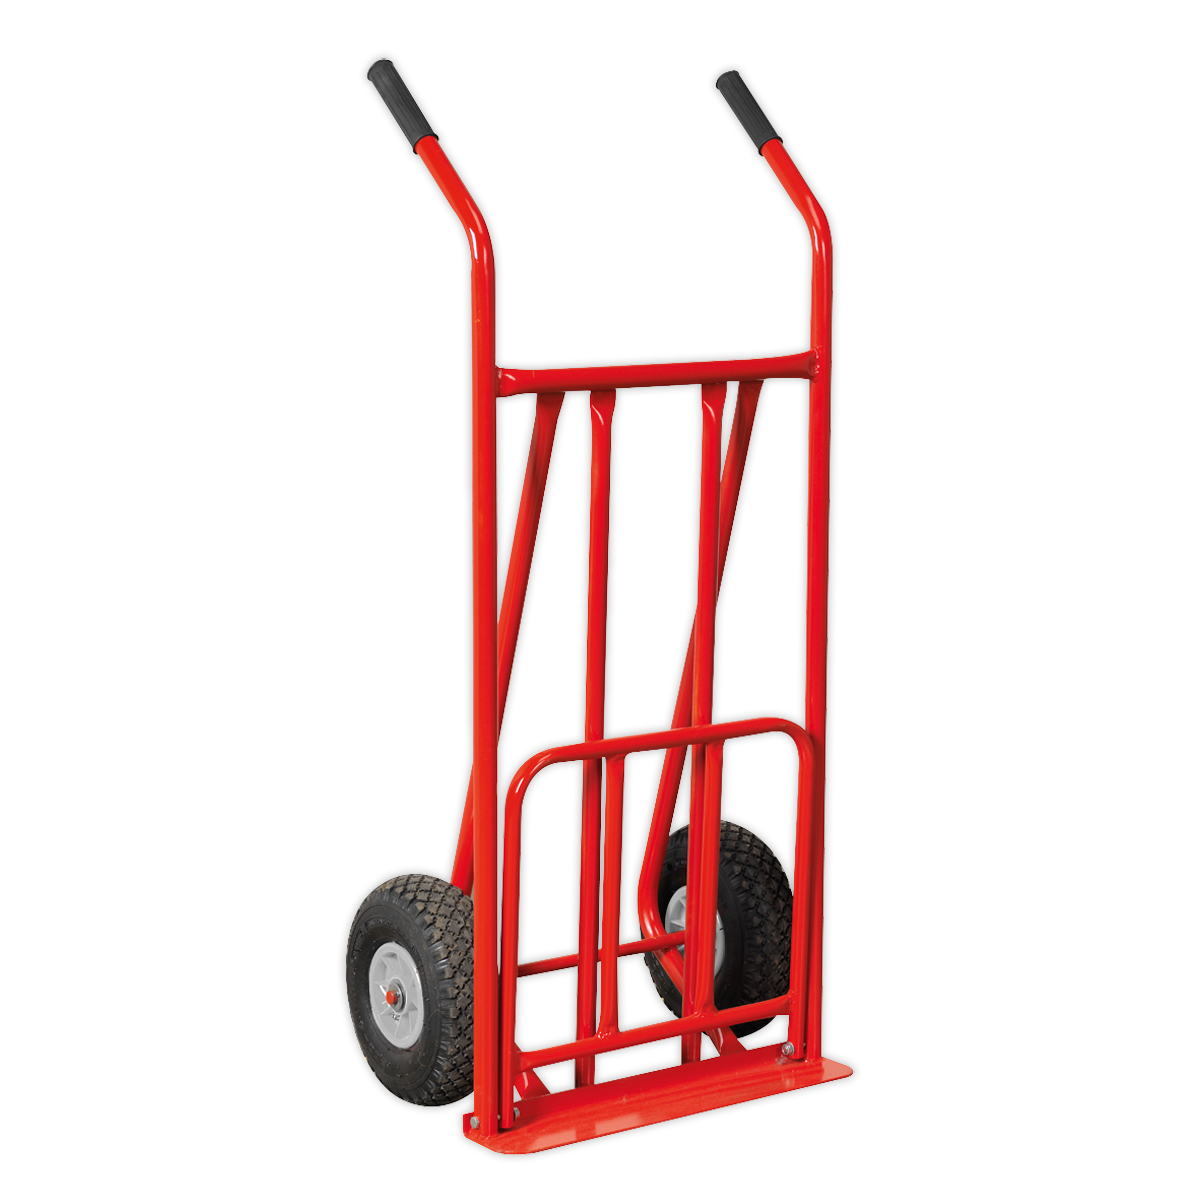 Sack Truck with Pneumatic Tyres Folding 150kg Capacity